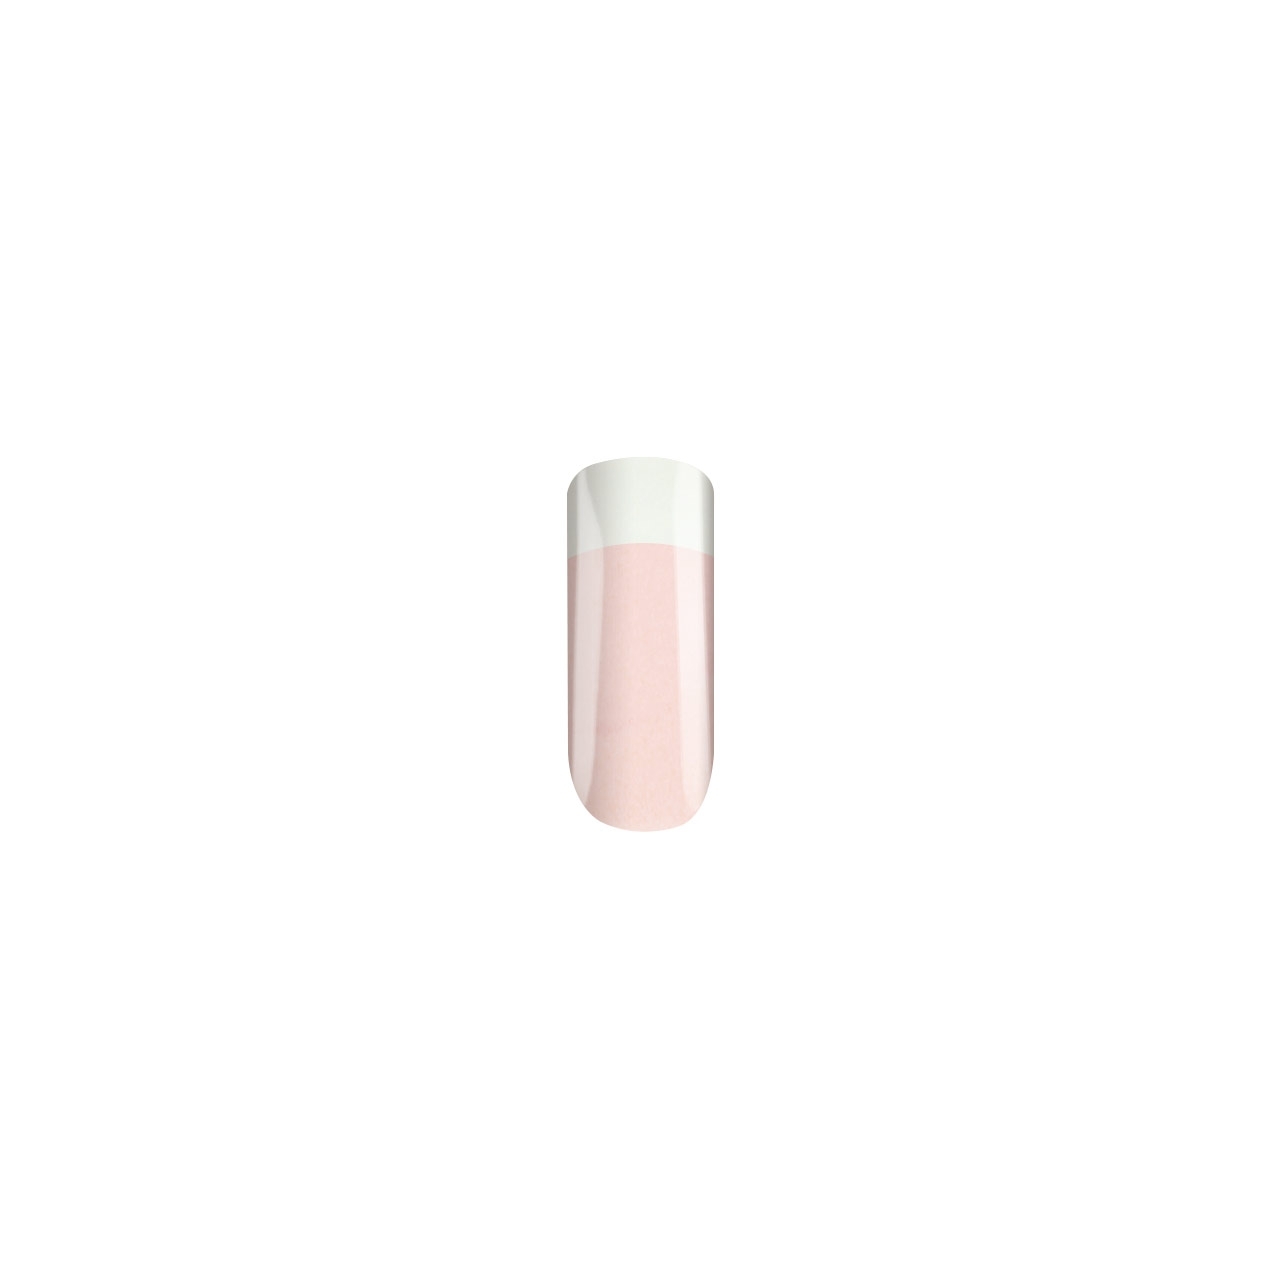 BAEHR BEAUTY CONCEPT - NAILS Nagellack rose french 11 ml